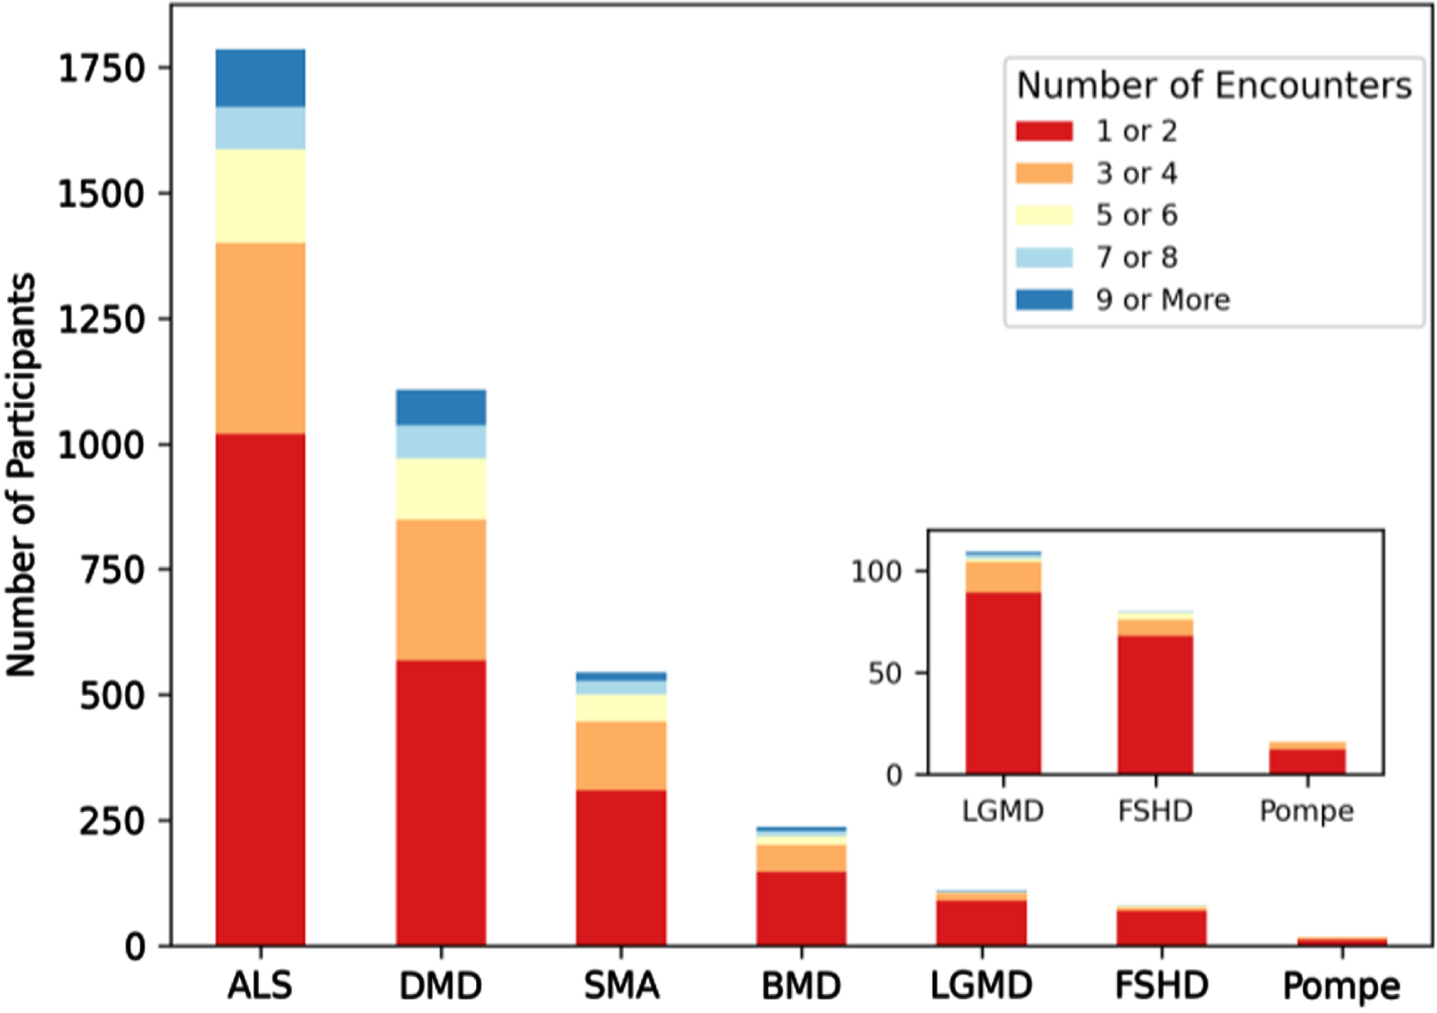 MOVR has the capacity for longitudinal data collection across disease progression through clinical encounters. Longitudinal data availability in MOVR was calculated by the number of encounters per participant and then assigned to one of five groups.